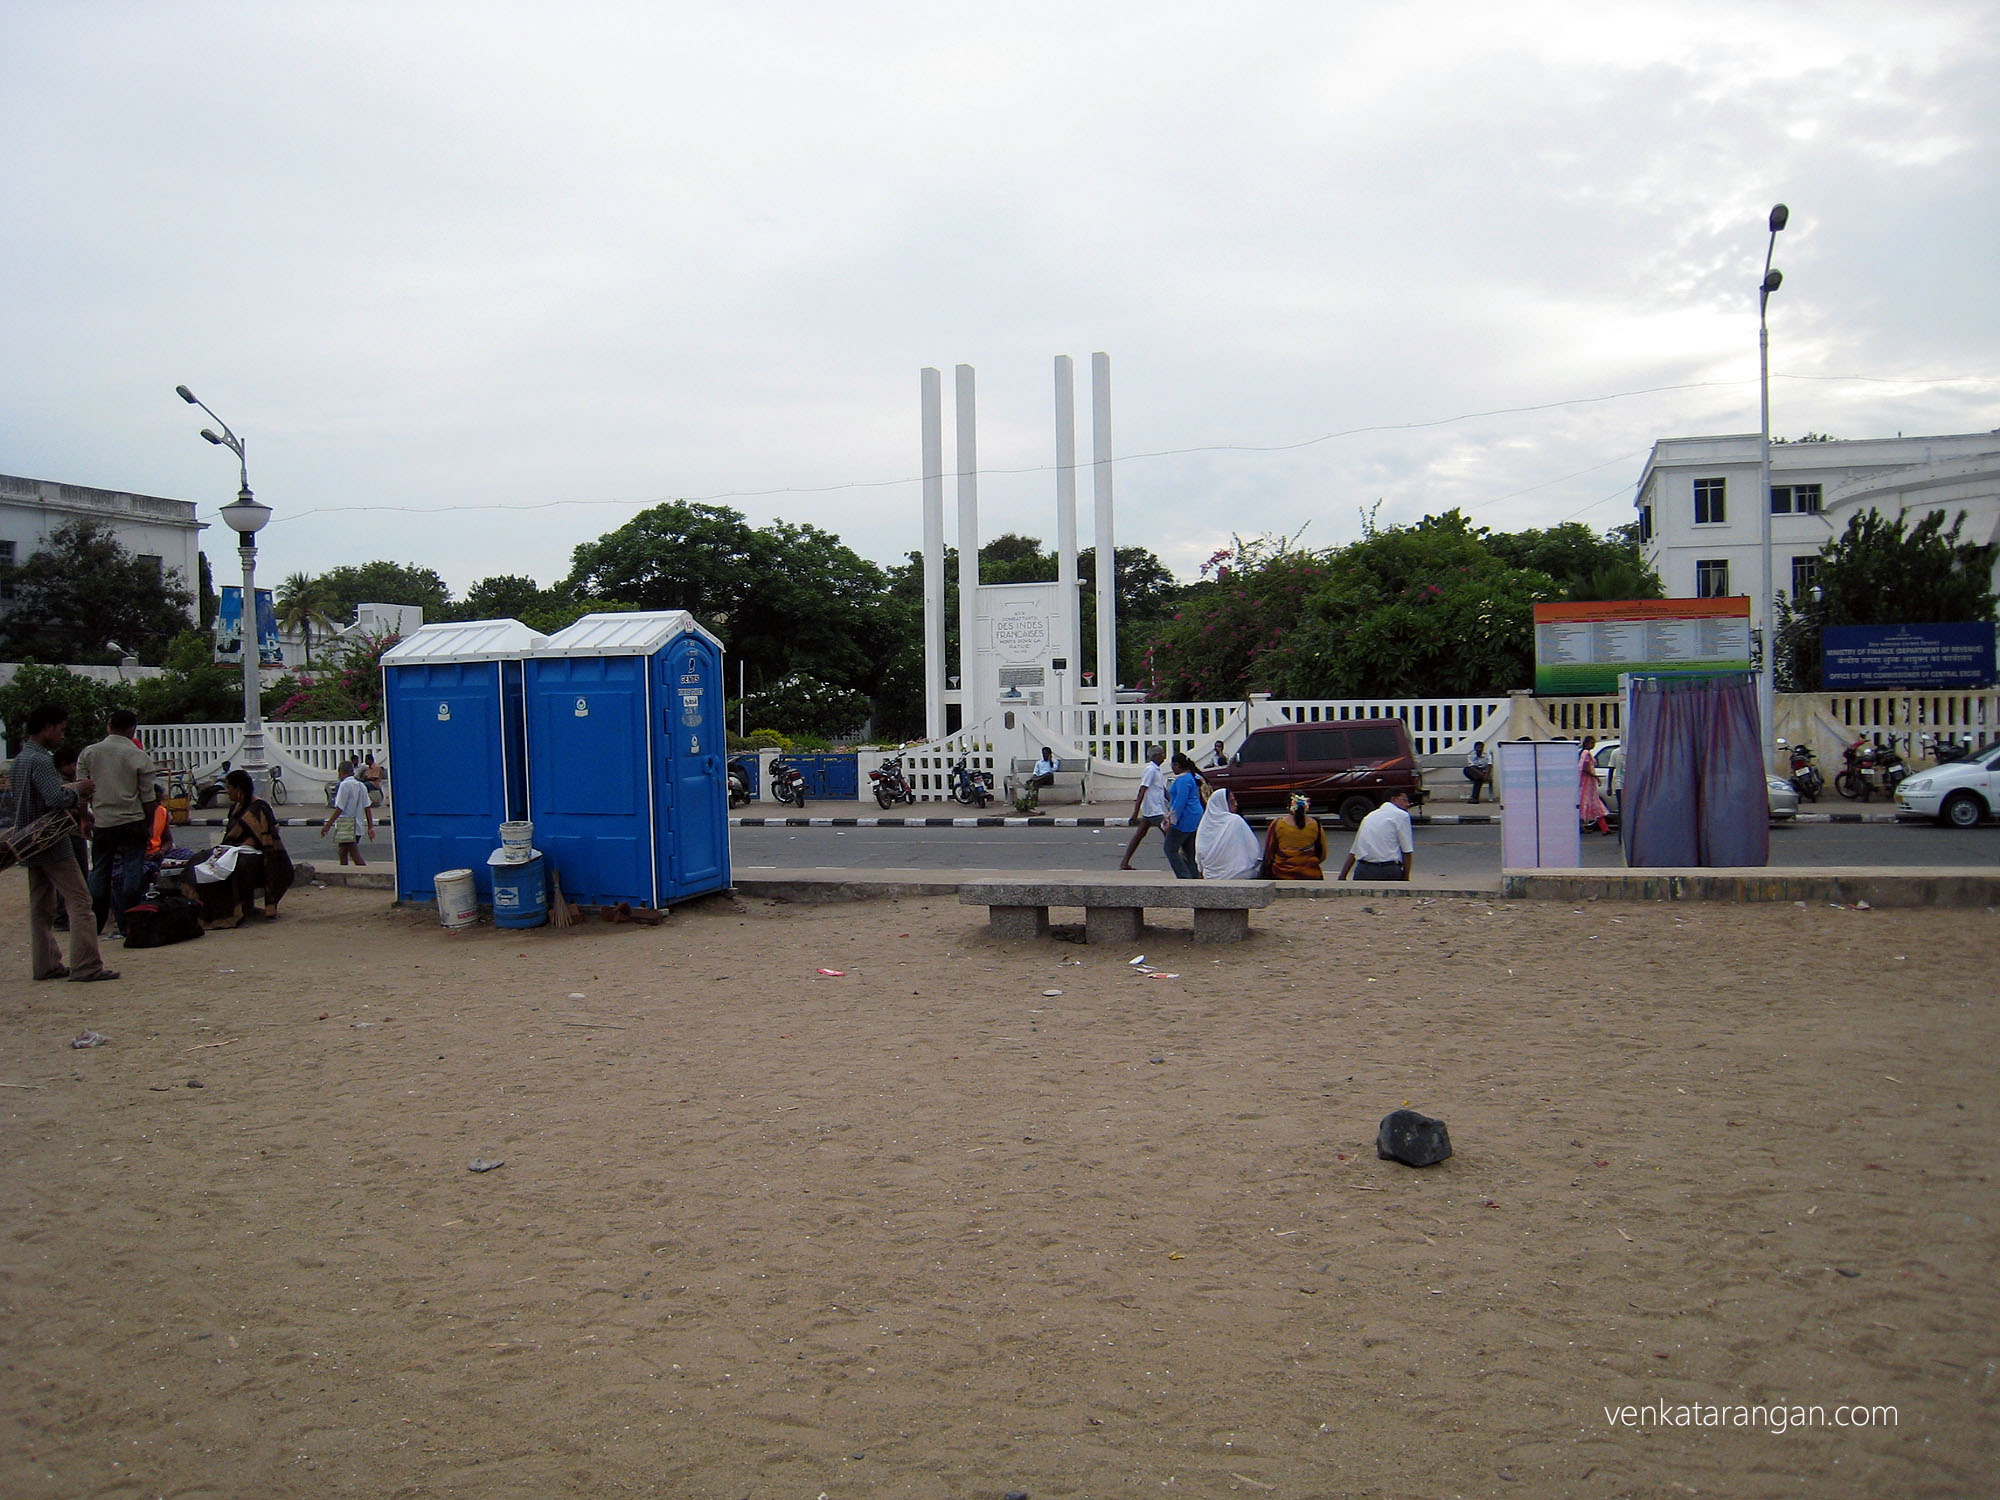 The first time I have seen a portable toilet (the blue boxes) for public convenience in an Indian city. Kudos to Pondy govt.